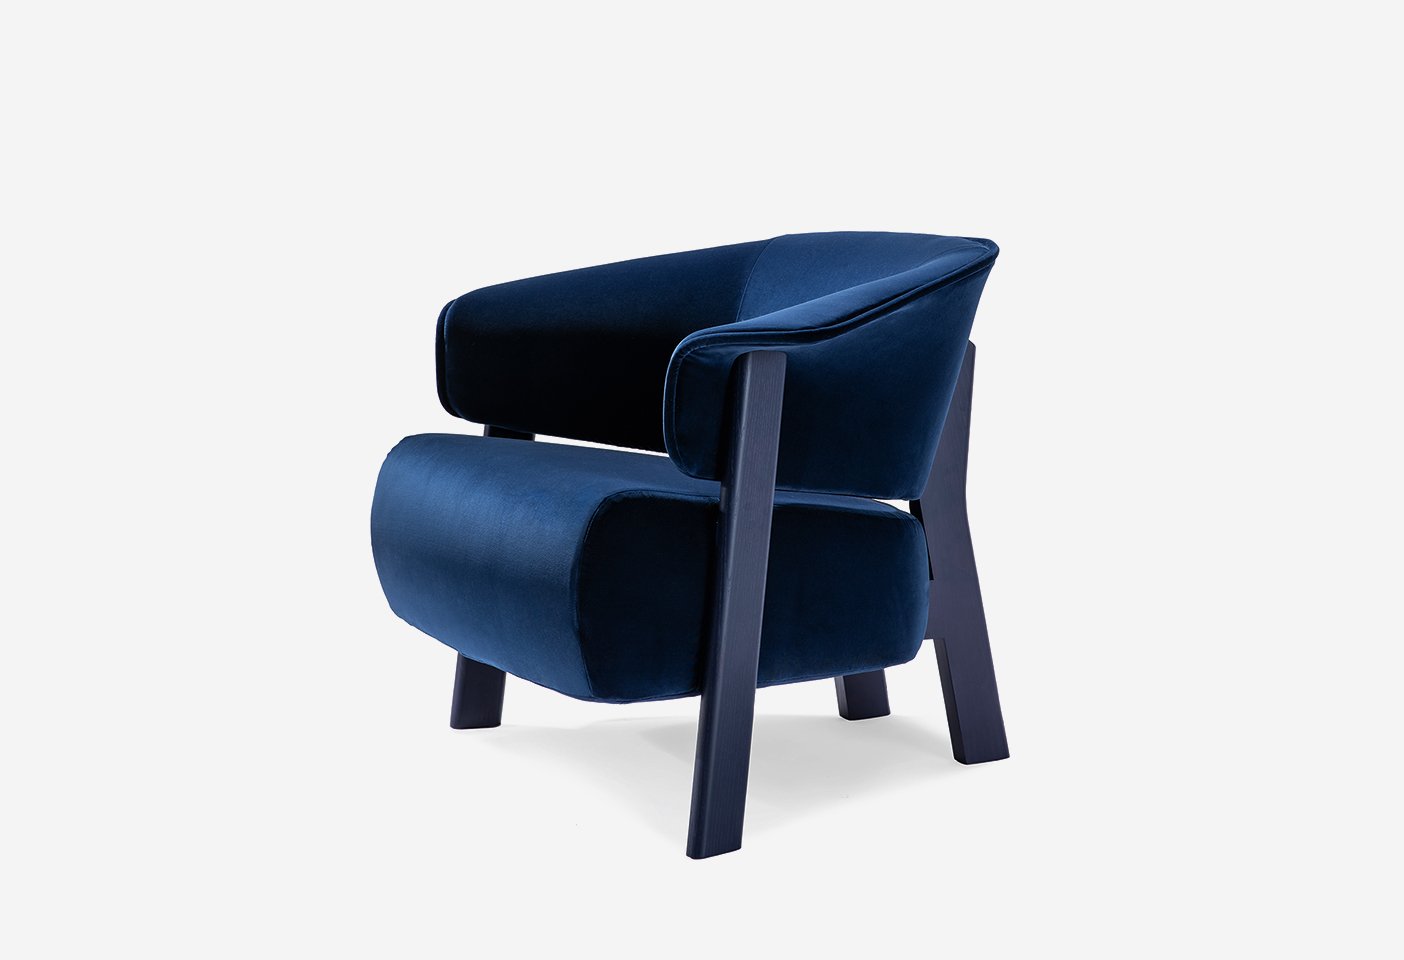 The Back-Wing armchair designed by Patricia Urquiola for Cassina. Photo c/o Cassina.